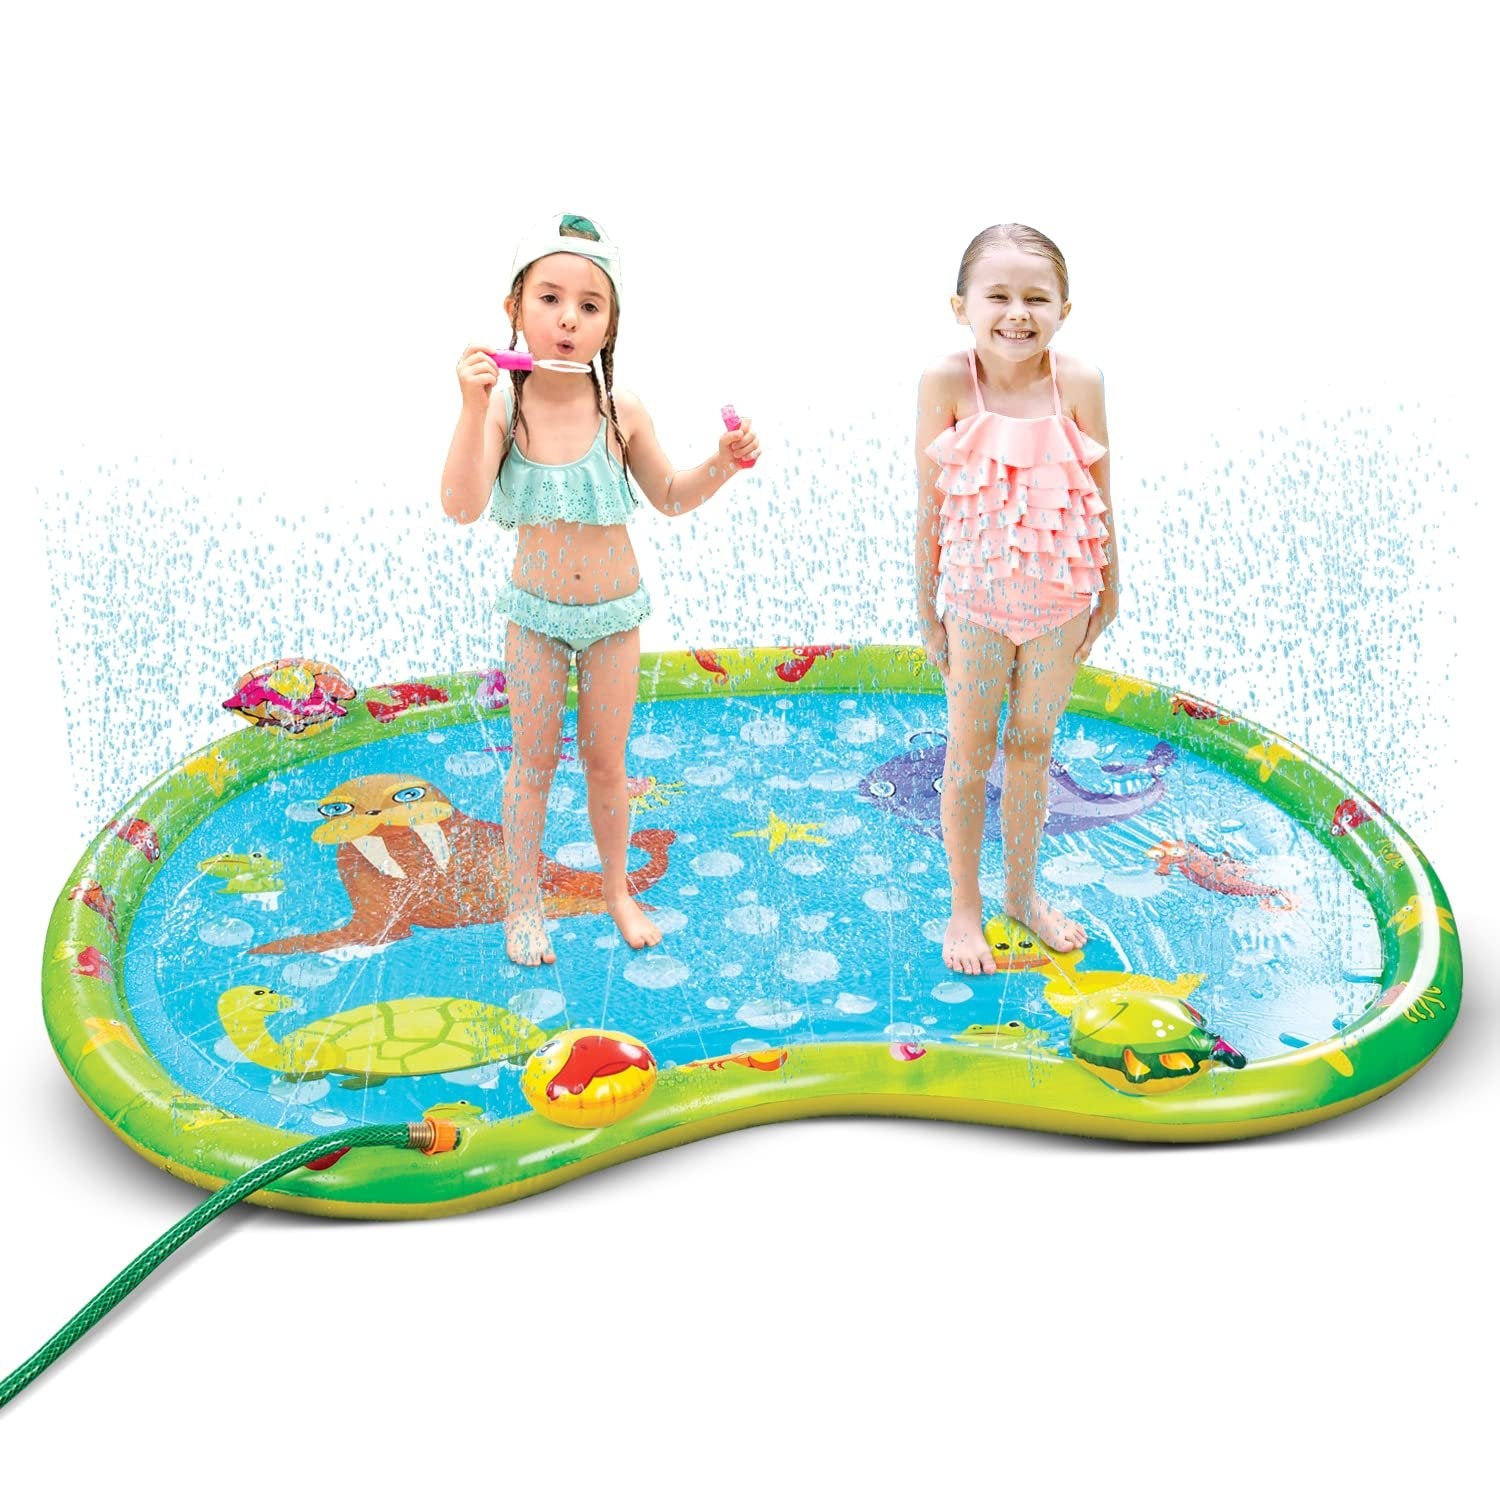 Inflatable Baby Splash Pad with Sprinklers for Outdoor Summer Fun - Blue/Green - Free Shipping & Returns